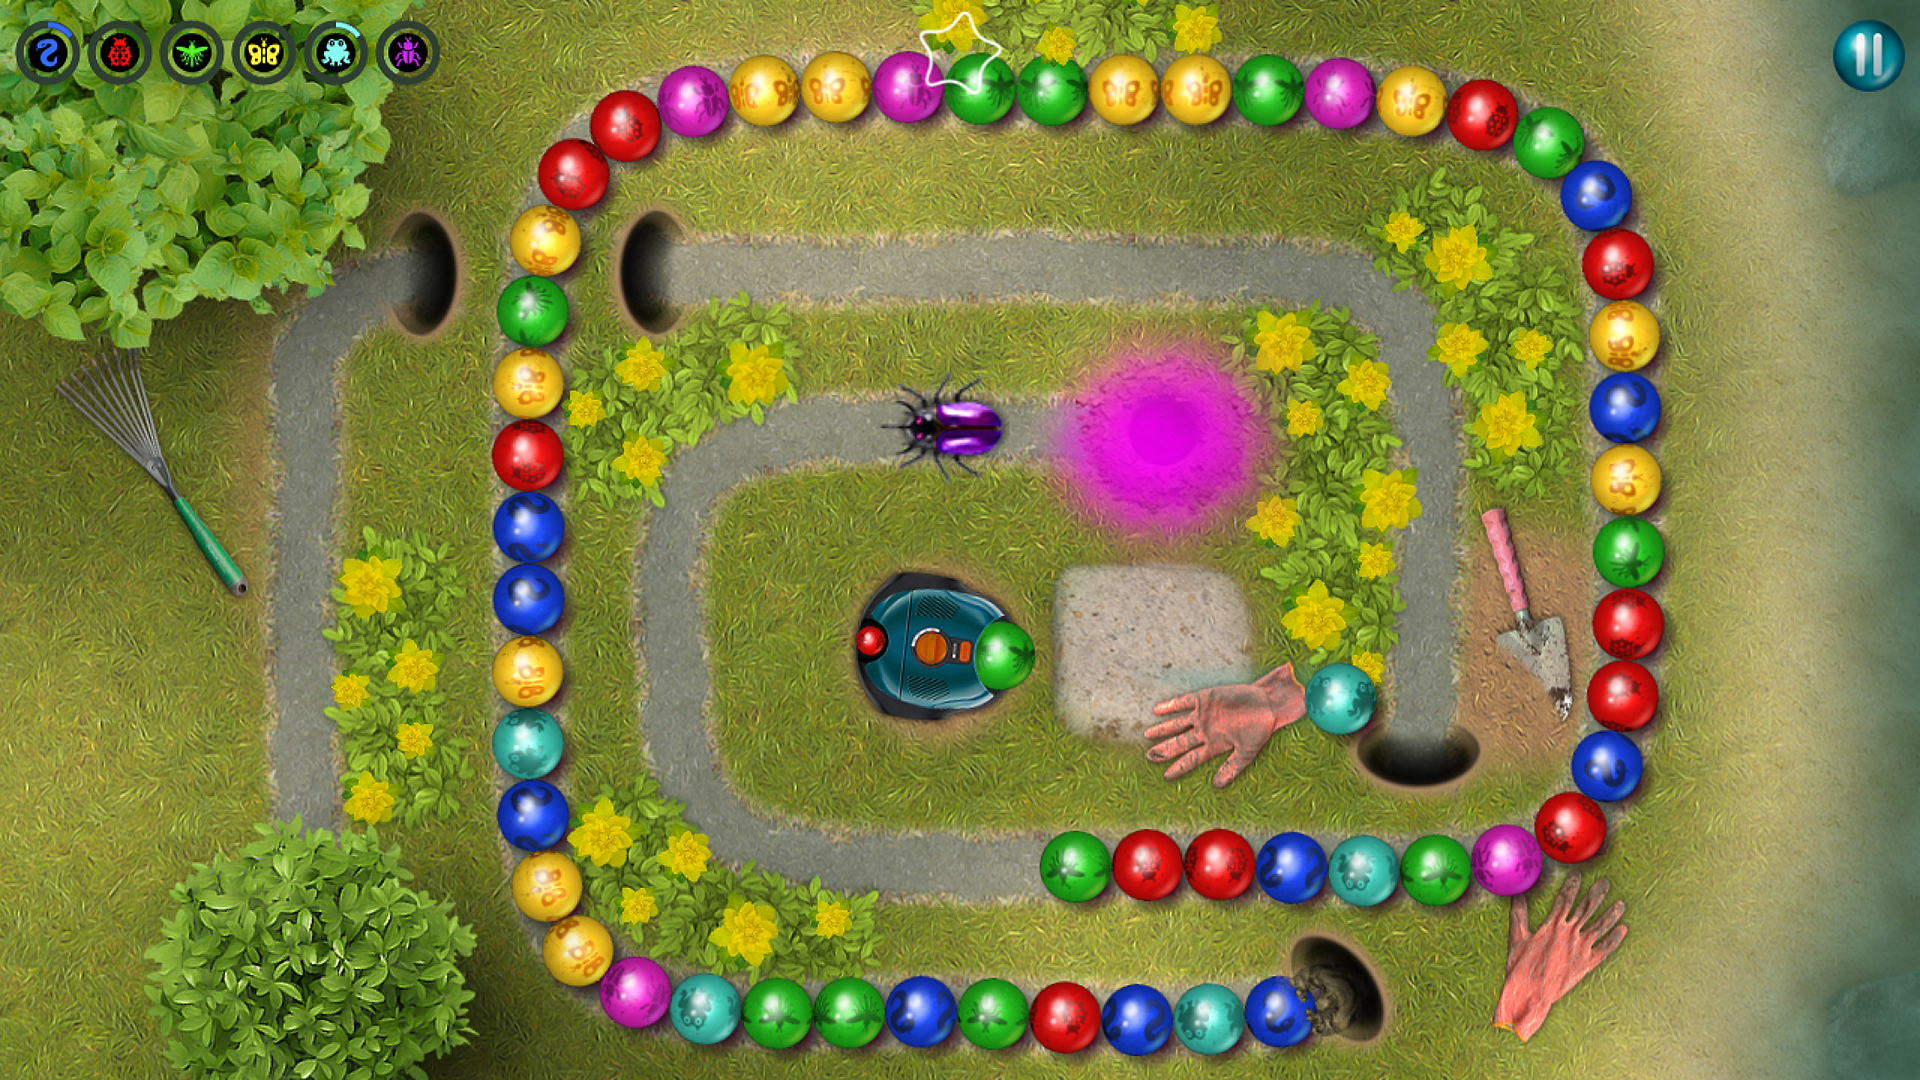 marble shooter games free online